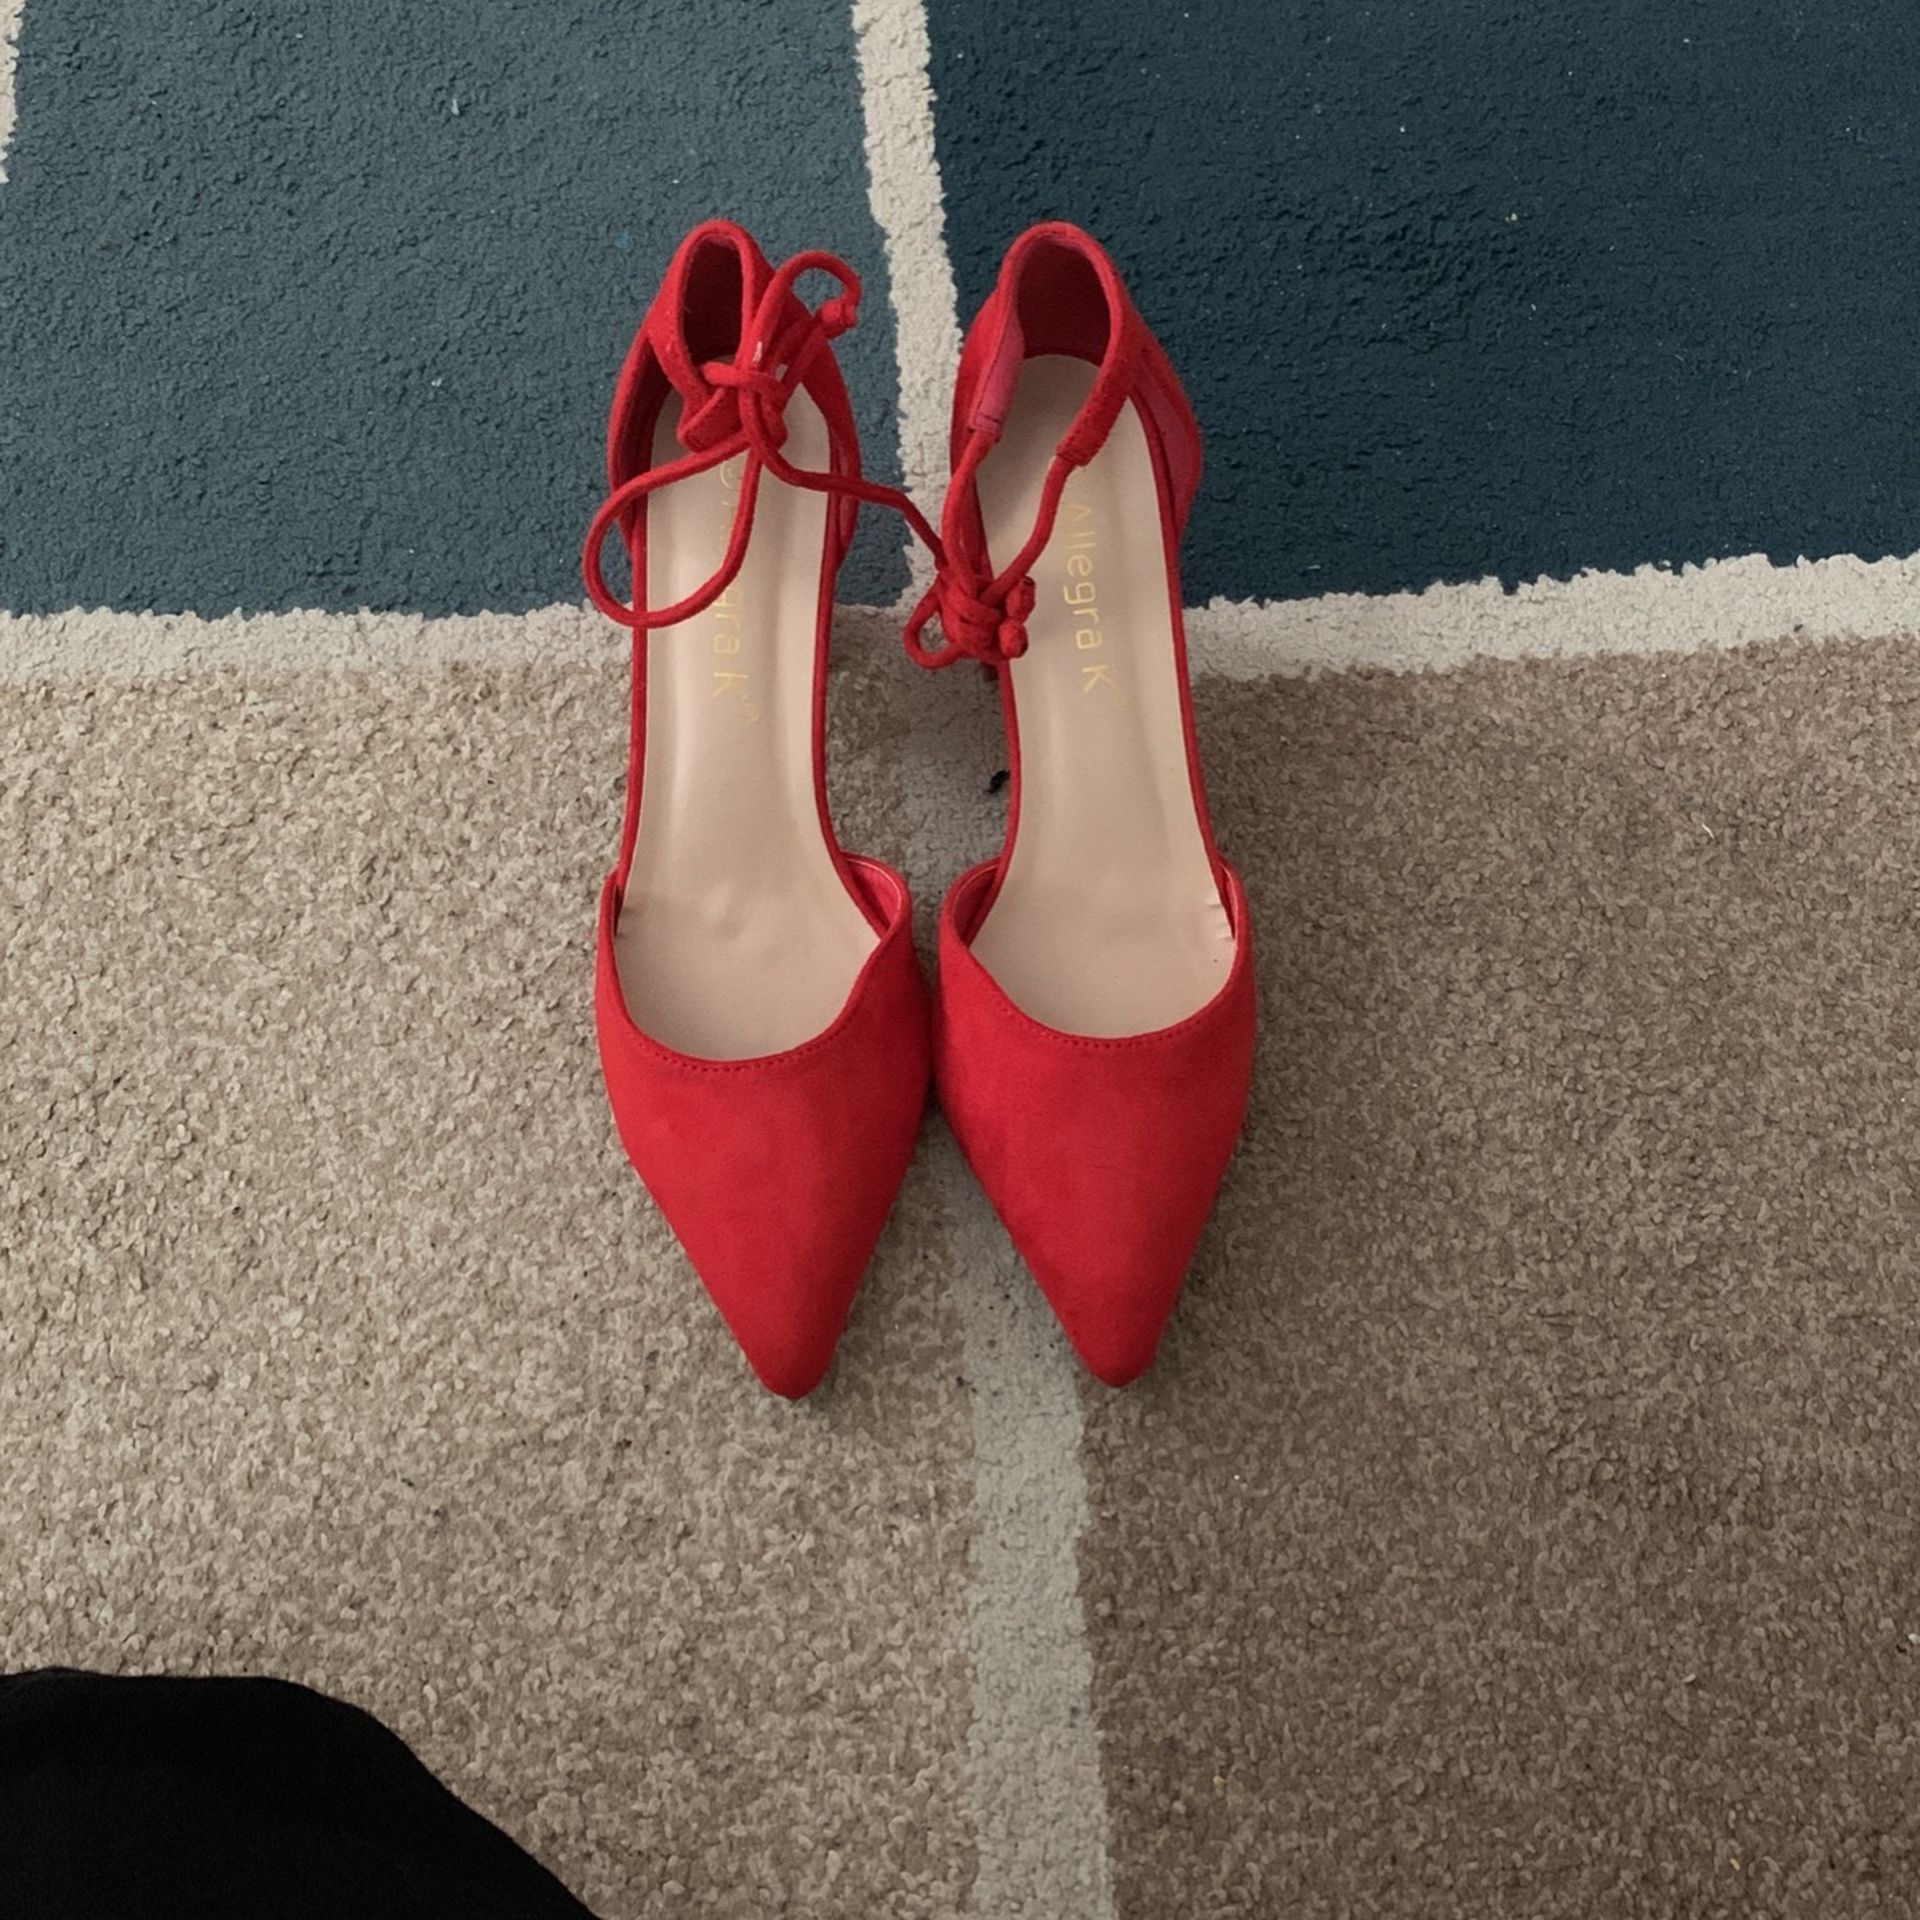 Size 9 New Red Heels